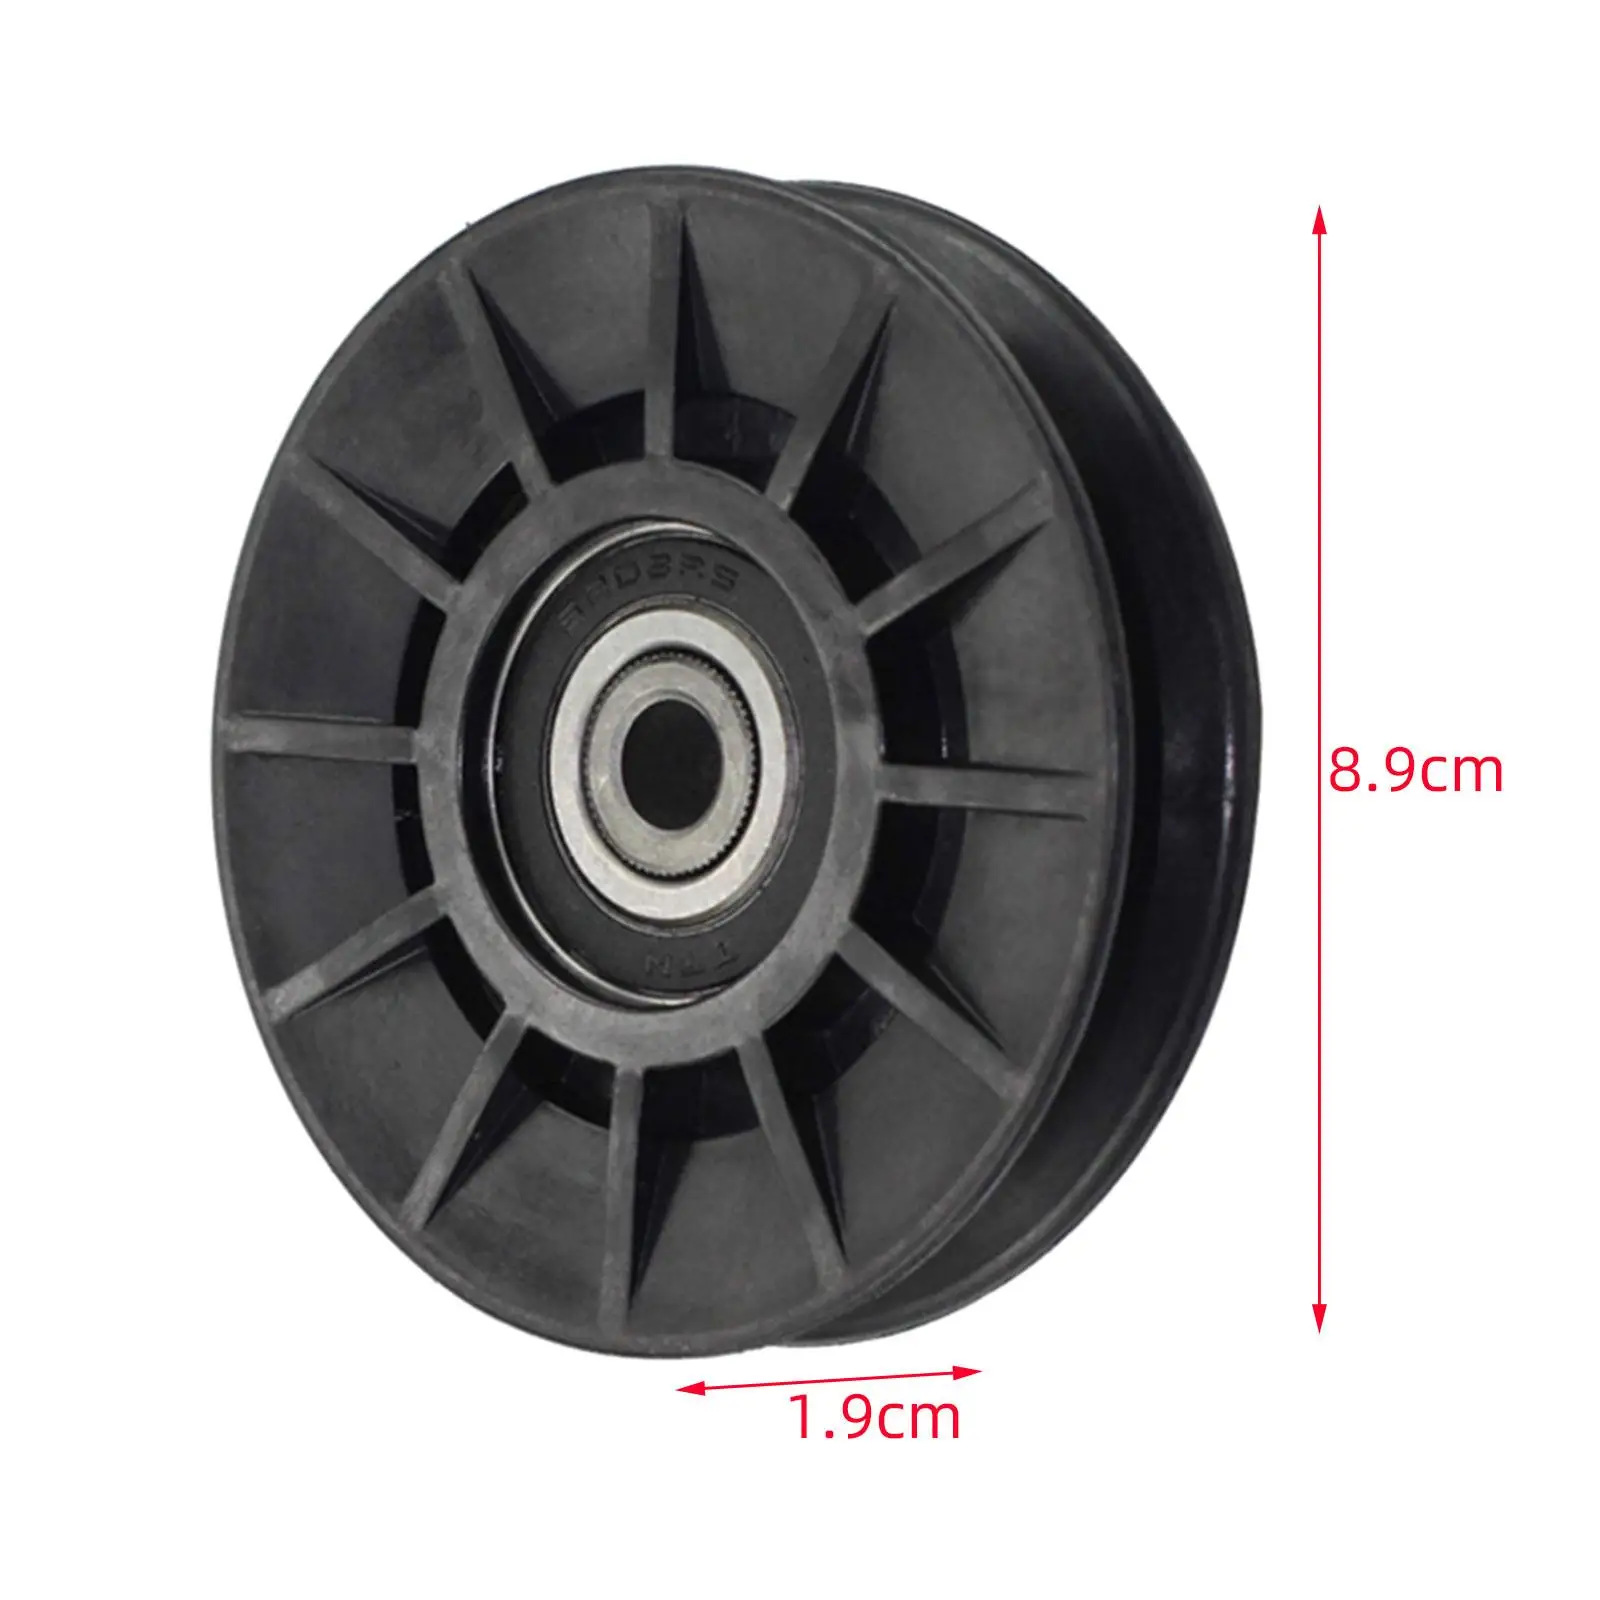 532194326 Parts Idler Pulley Replacement Drive Belt Idler Pulley for 532194226 280659 194326 Lawn Mowers Garden Power Tools